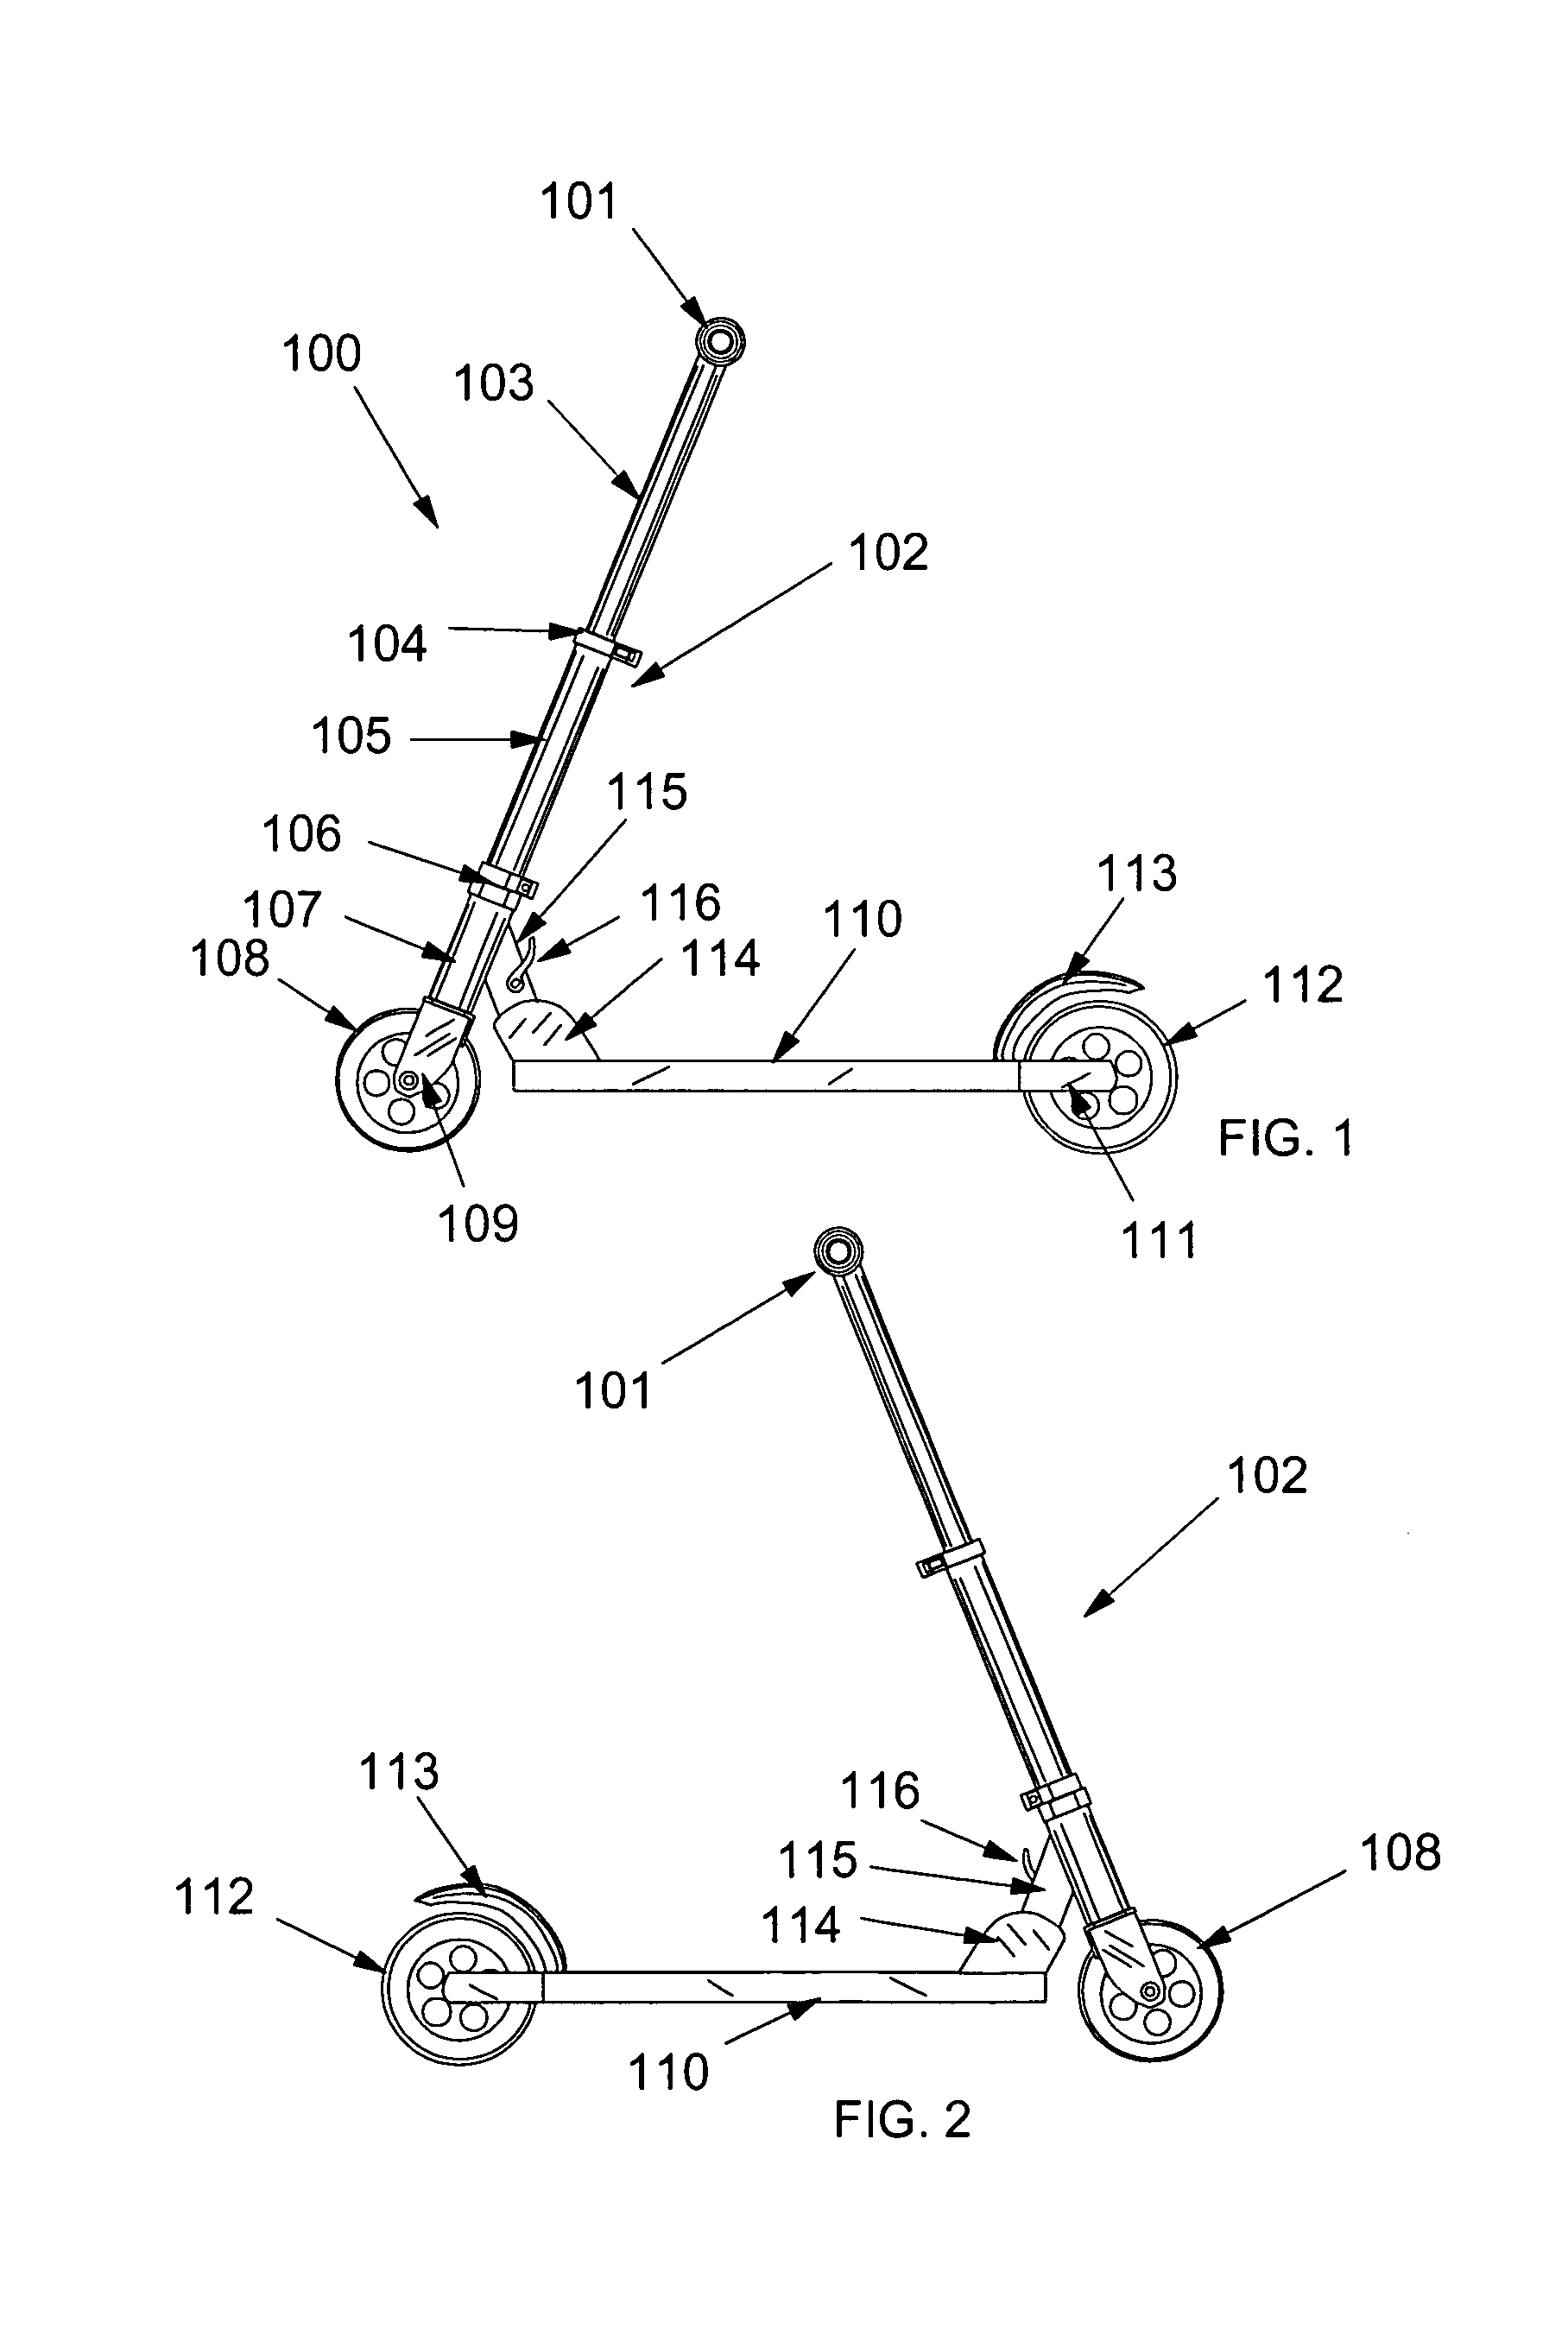 Folding scooter with foot board connector